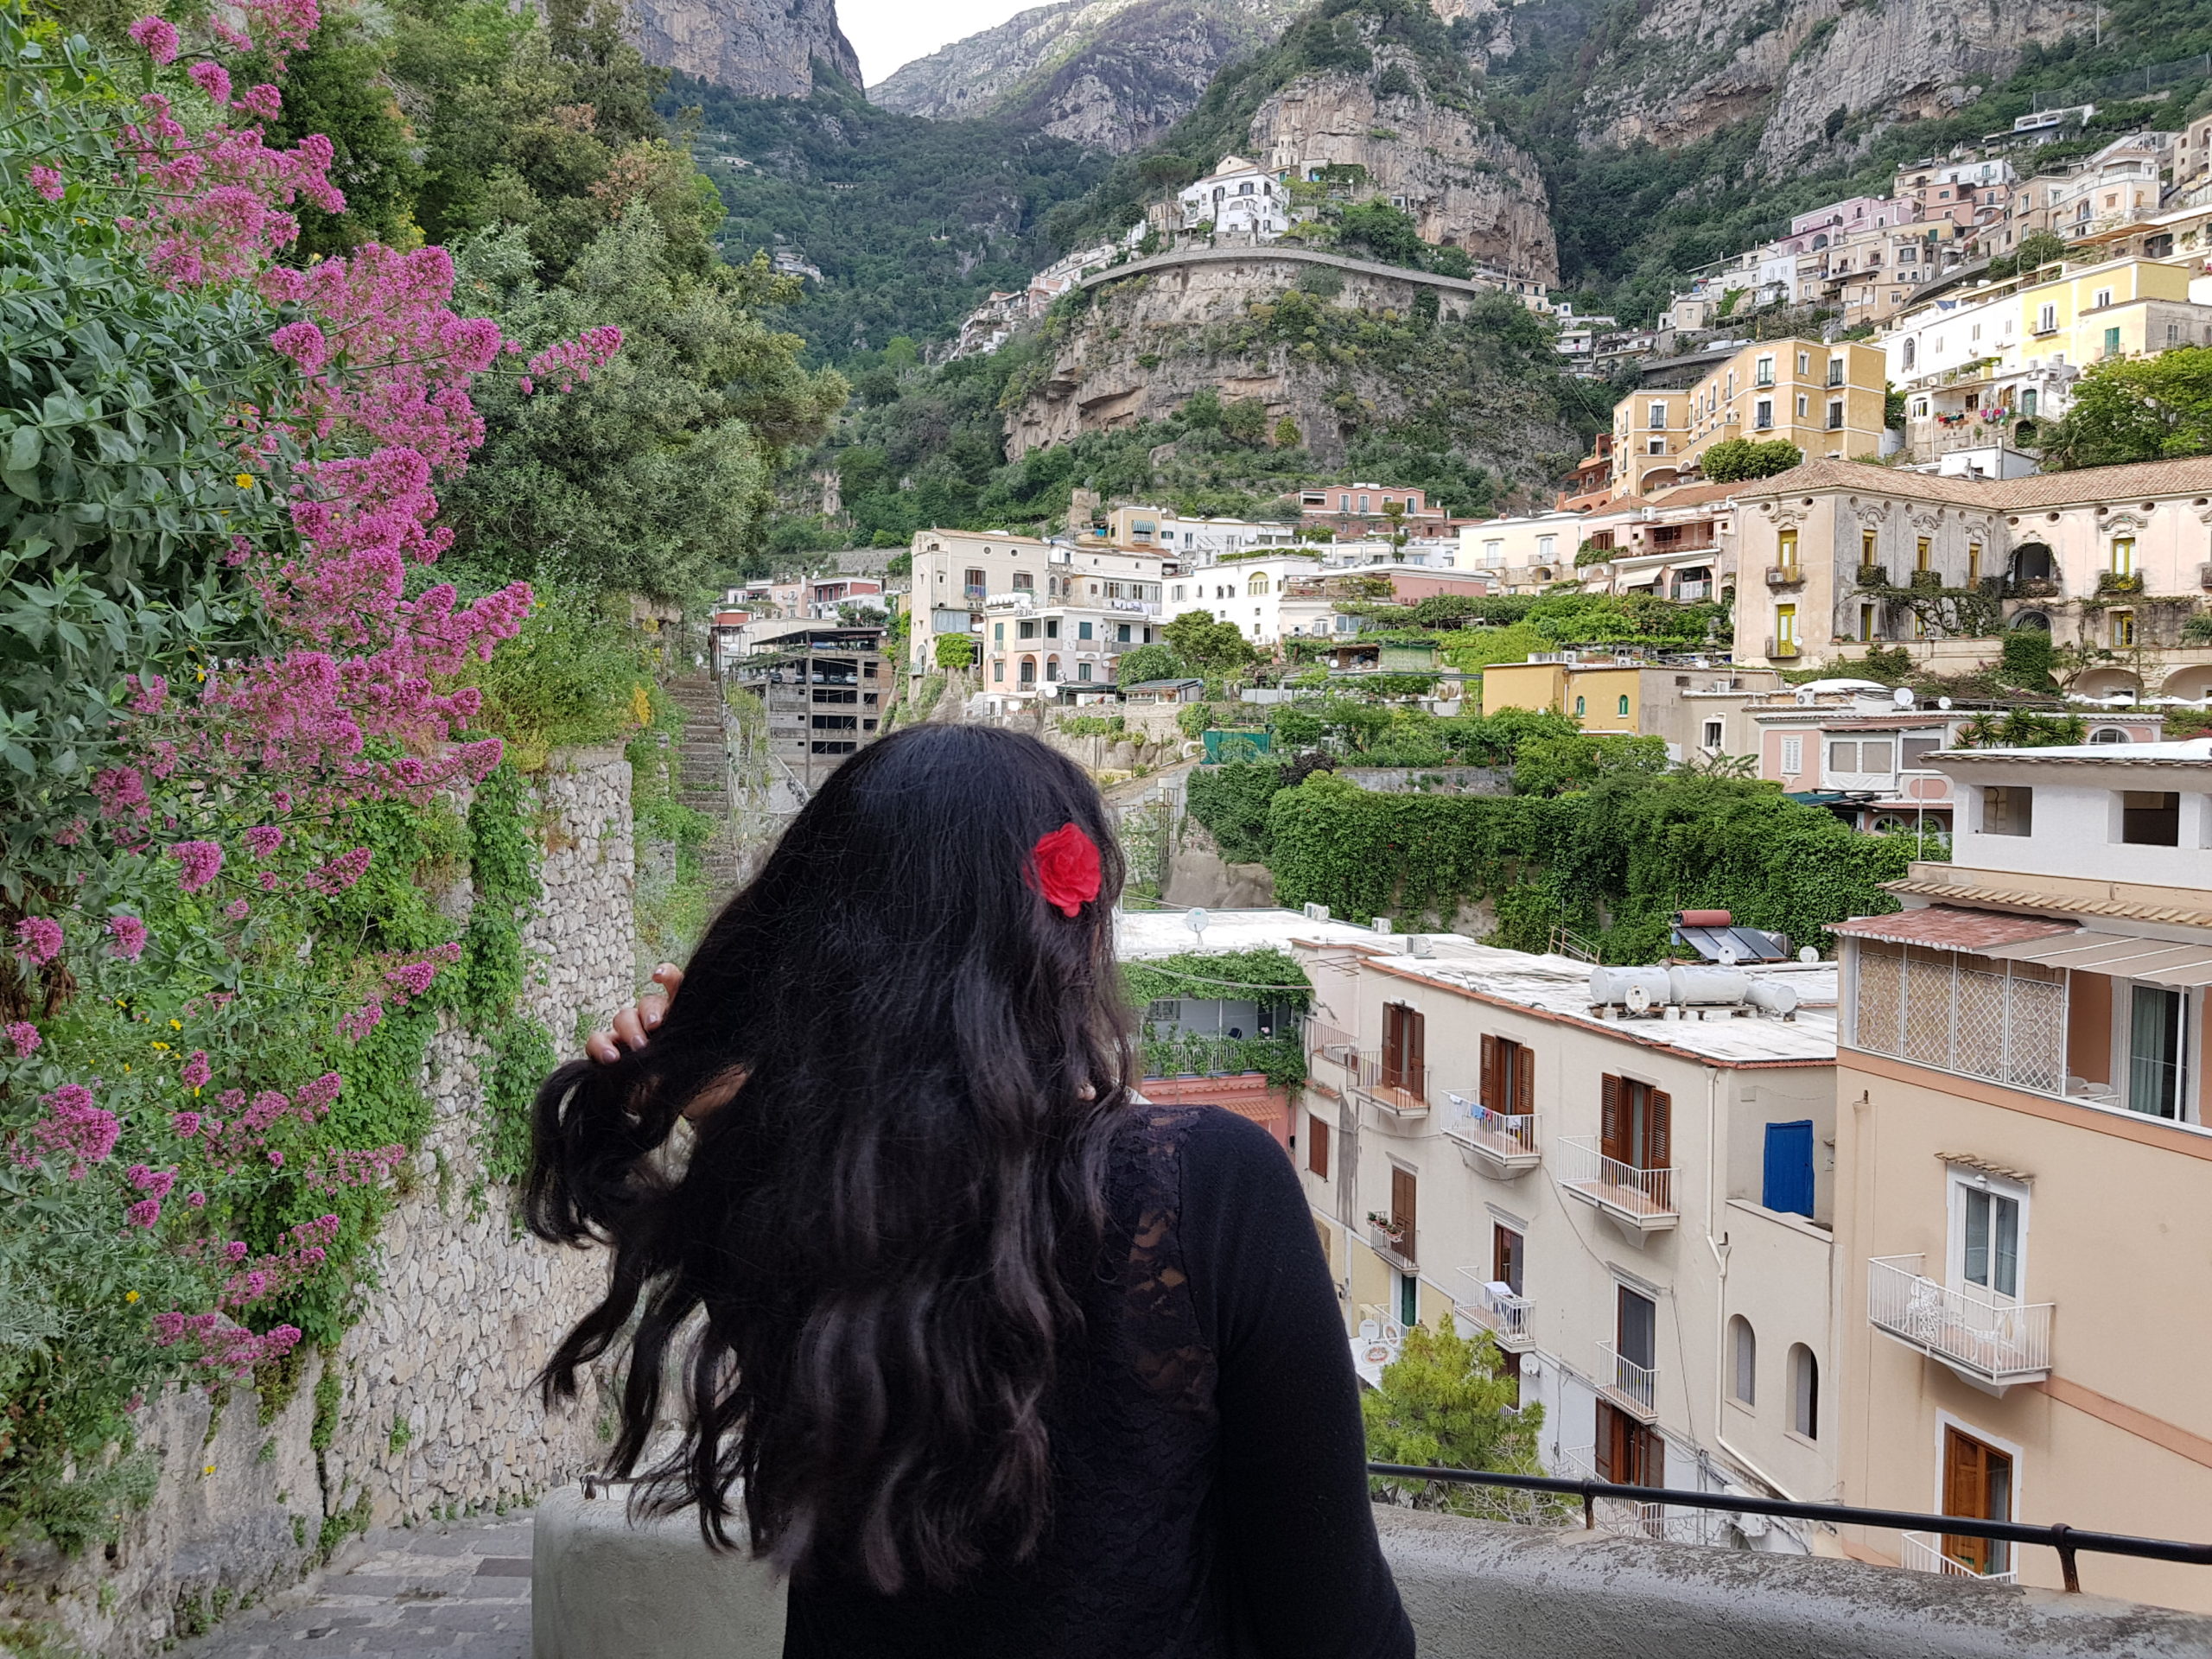 Woman is standing with her back to the camera with her dark hair loose and a red flower on the right side of her hair. She is flicking her hair over her left shoulder. In the background is a beautiful view of the hills and architecture of Positano, Amalfi Coast, Italy.